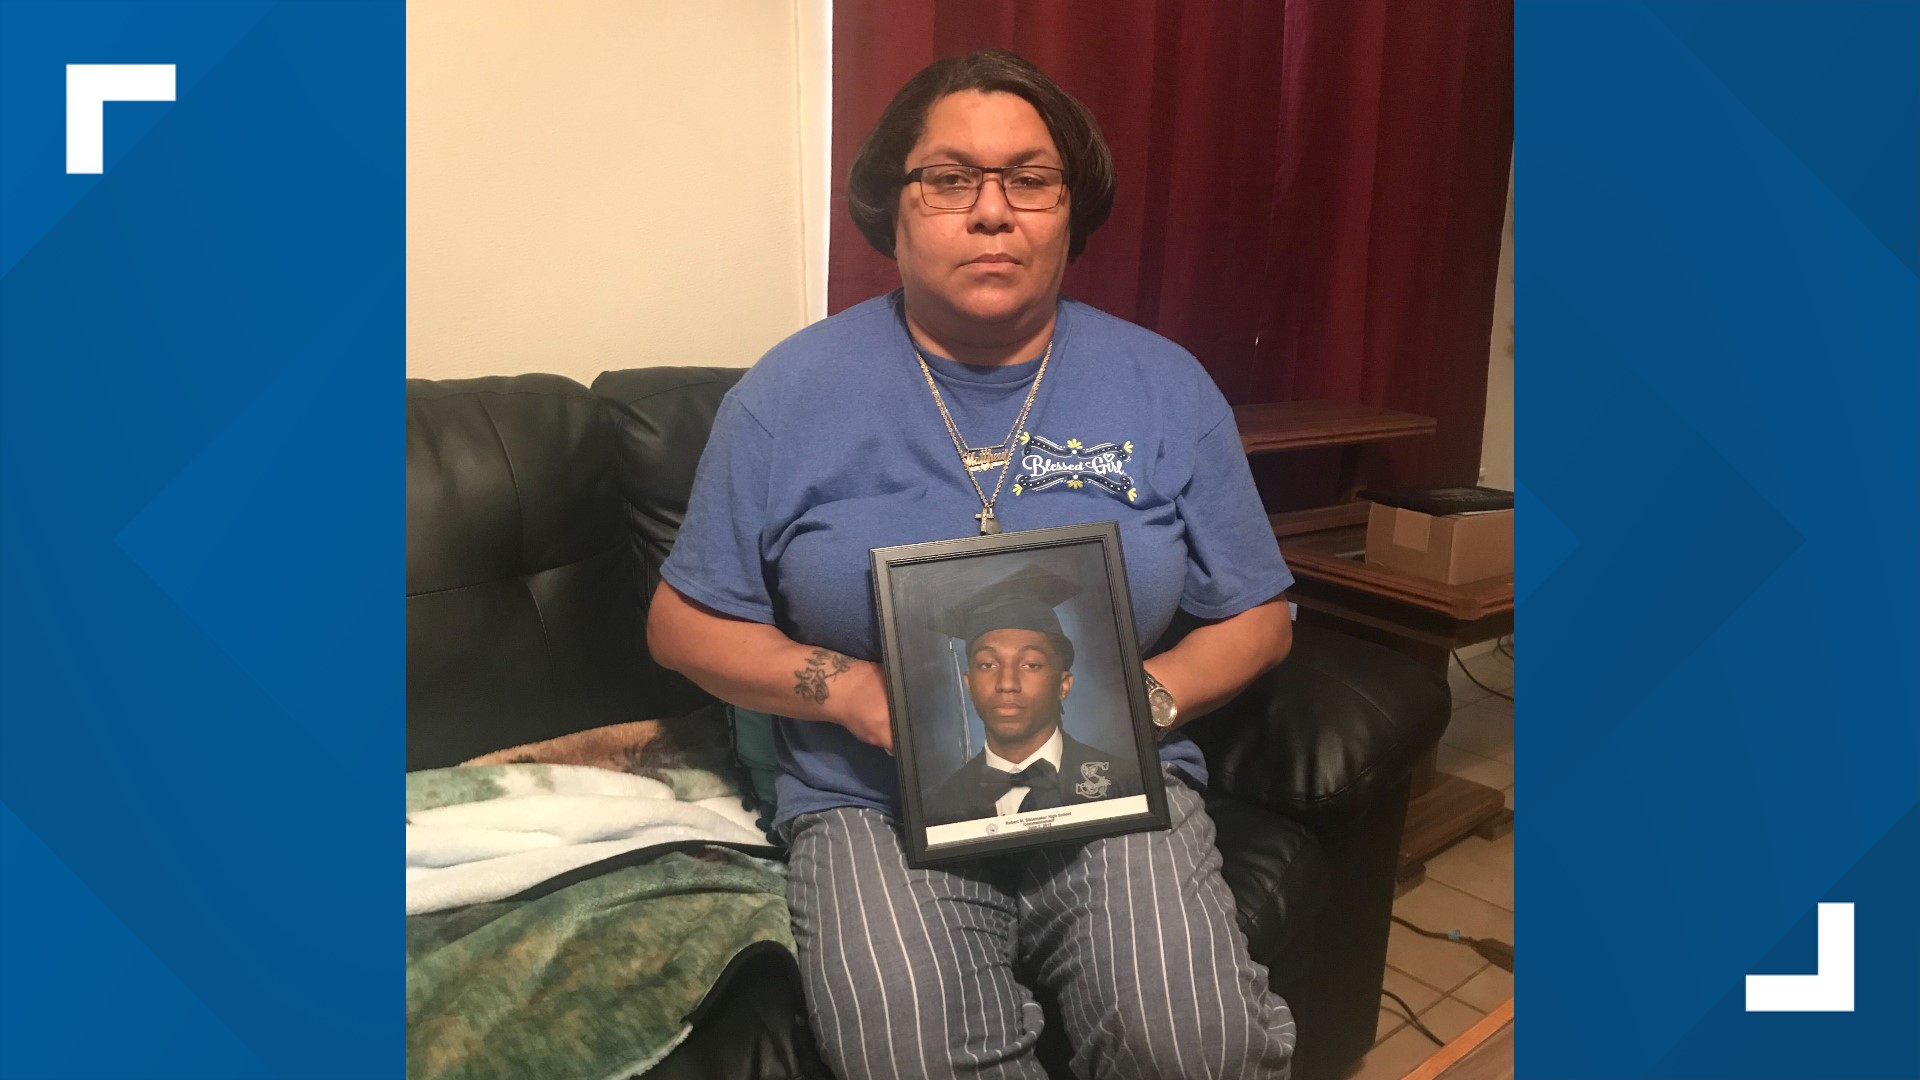 19 years-old Lou Busby, III died on New Year's Eve 2019 after being shot days before. A year later, his mother is frustrated as the case remains at a stand still.